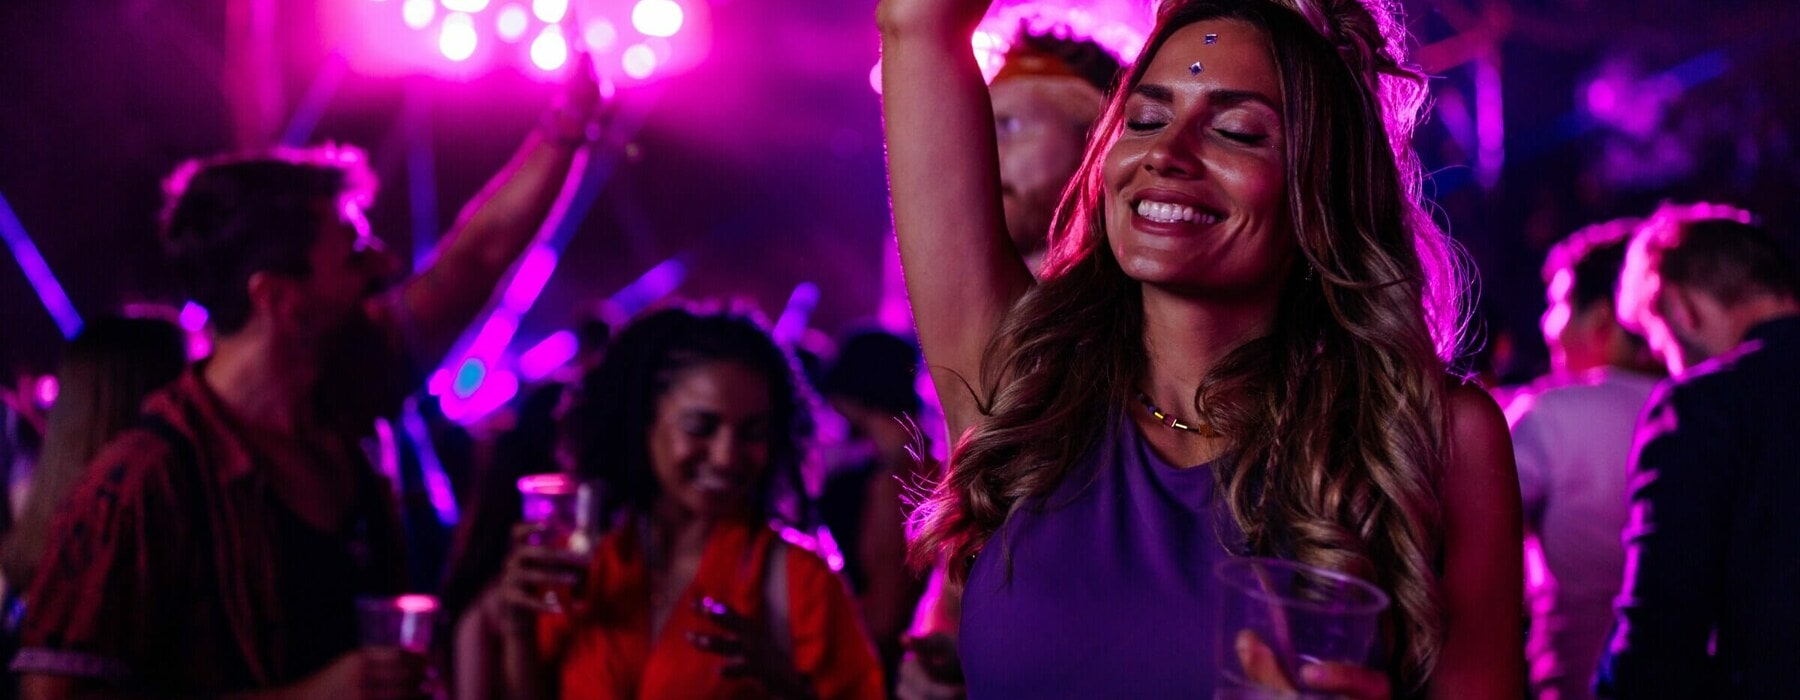 A,Young,Caucasian,Woman,Is,Dancing,At,A,Concert,Having